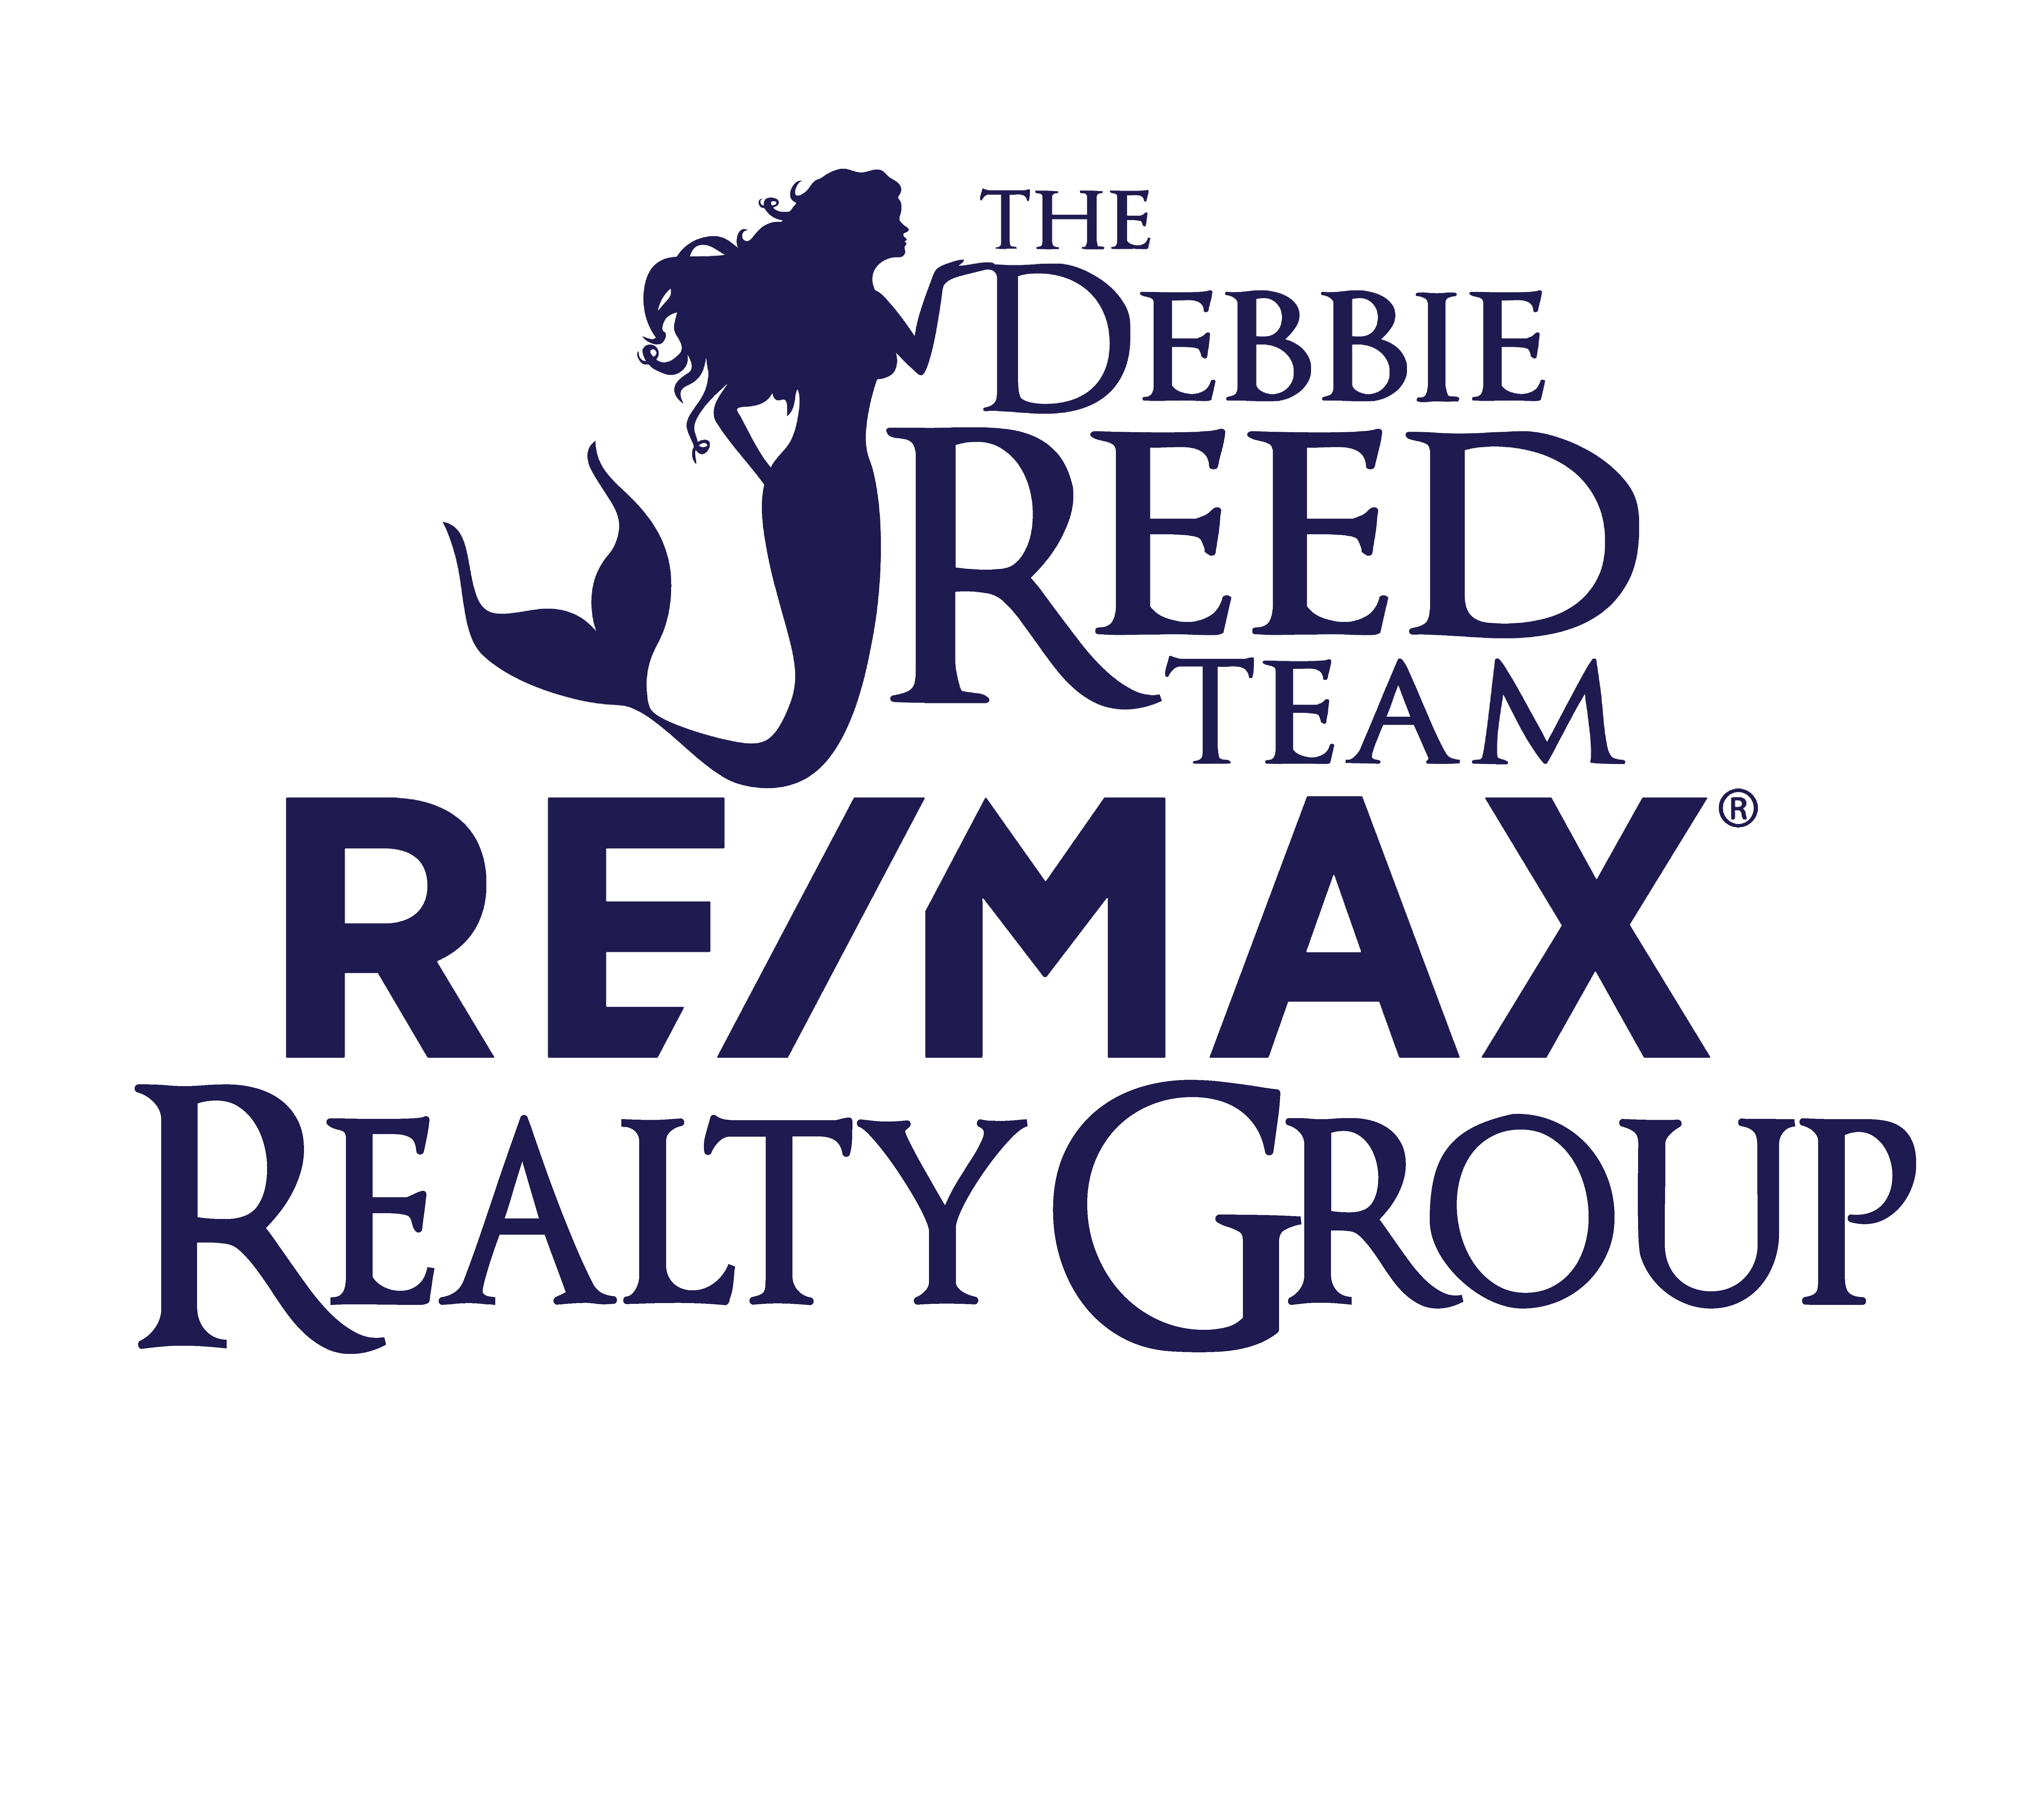 The Debbie Reed Team/REMAX Realty Group